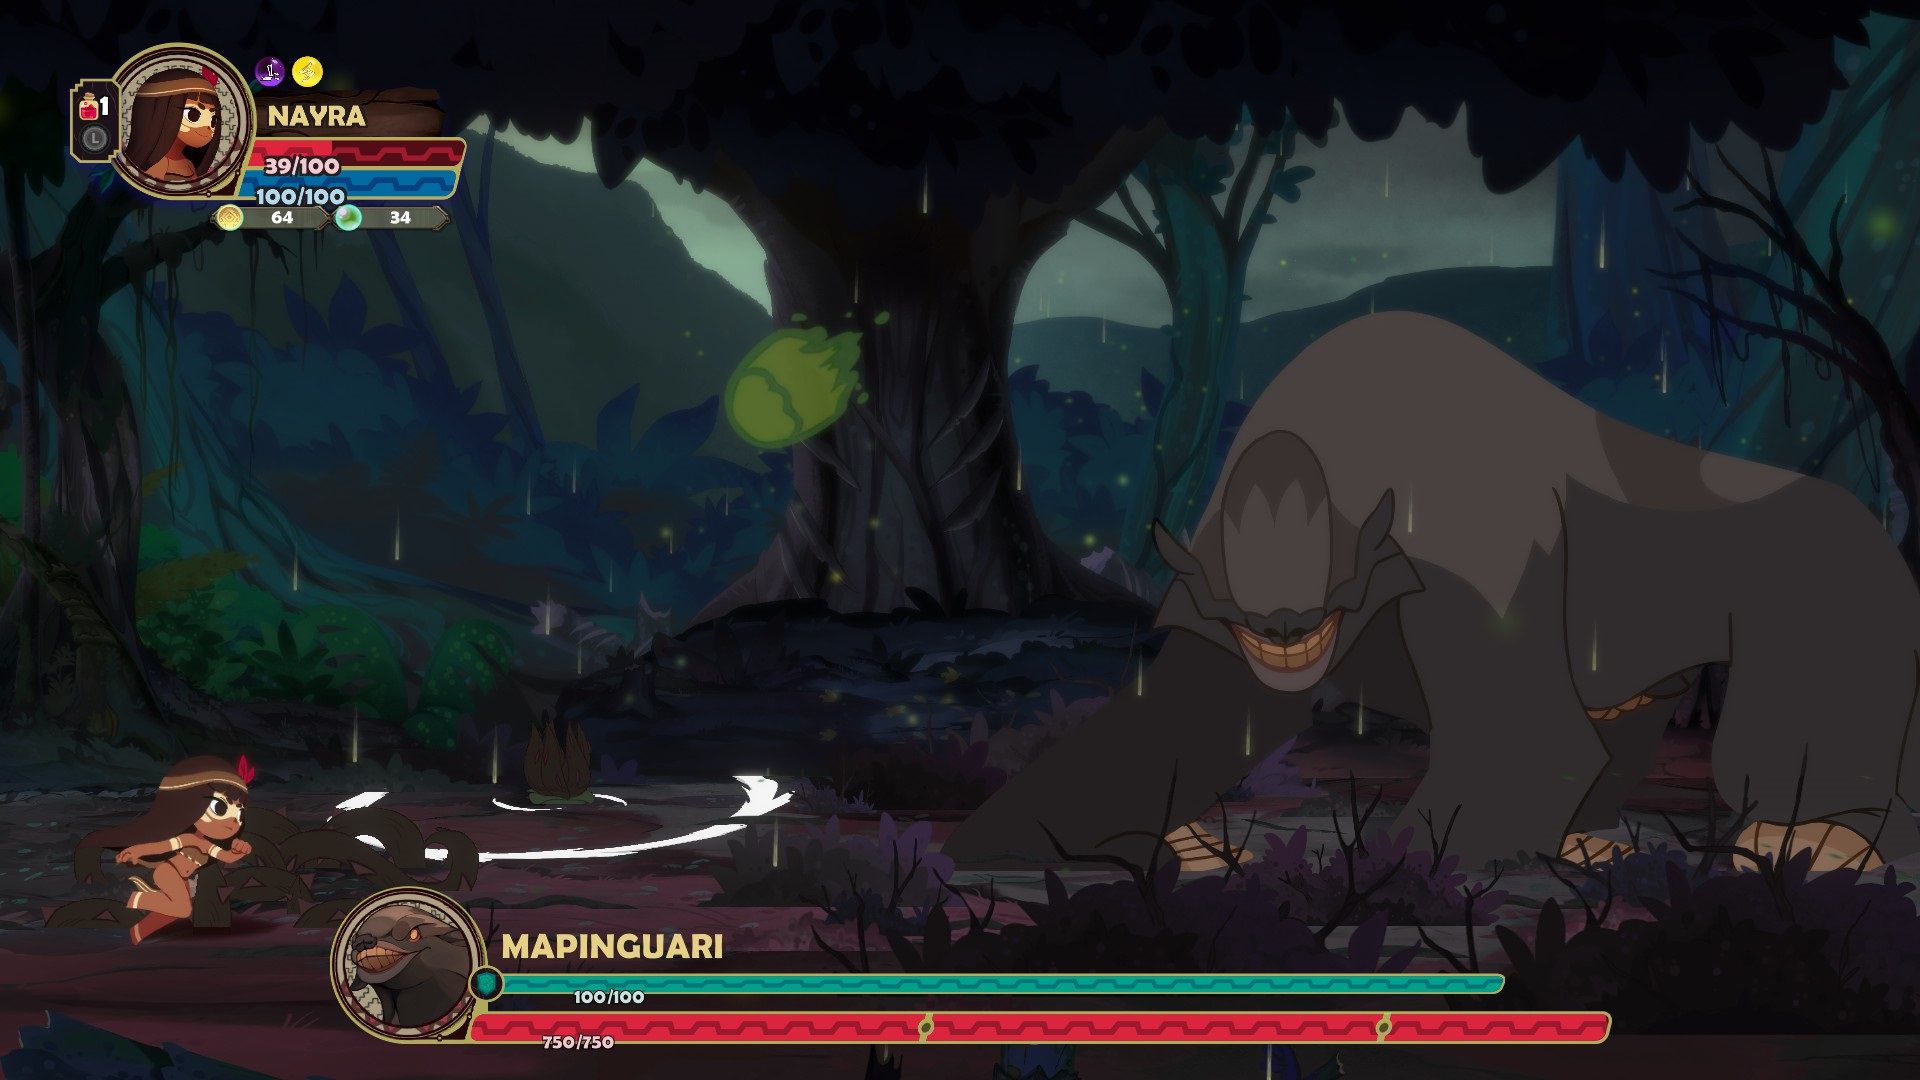 The first boss of the game, Mapinguari